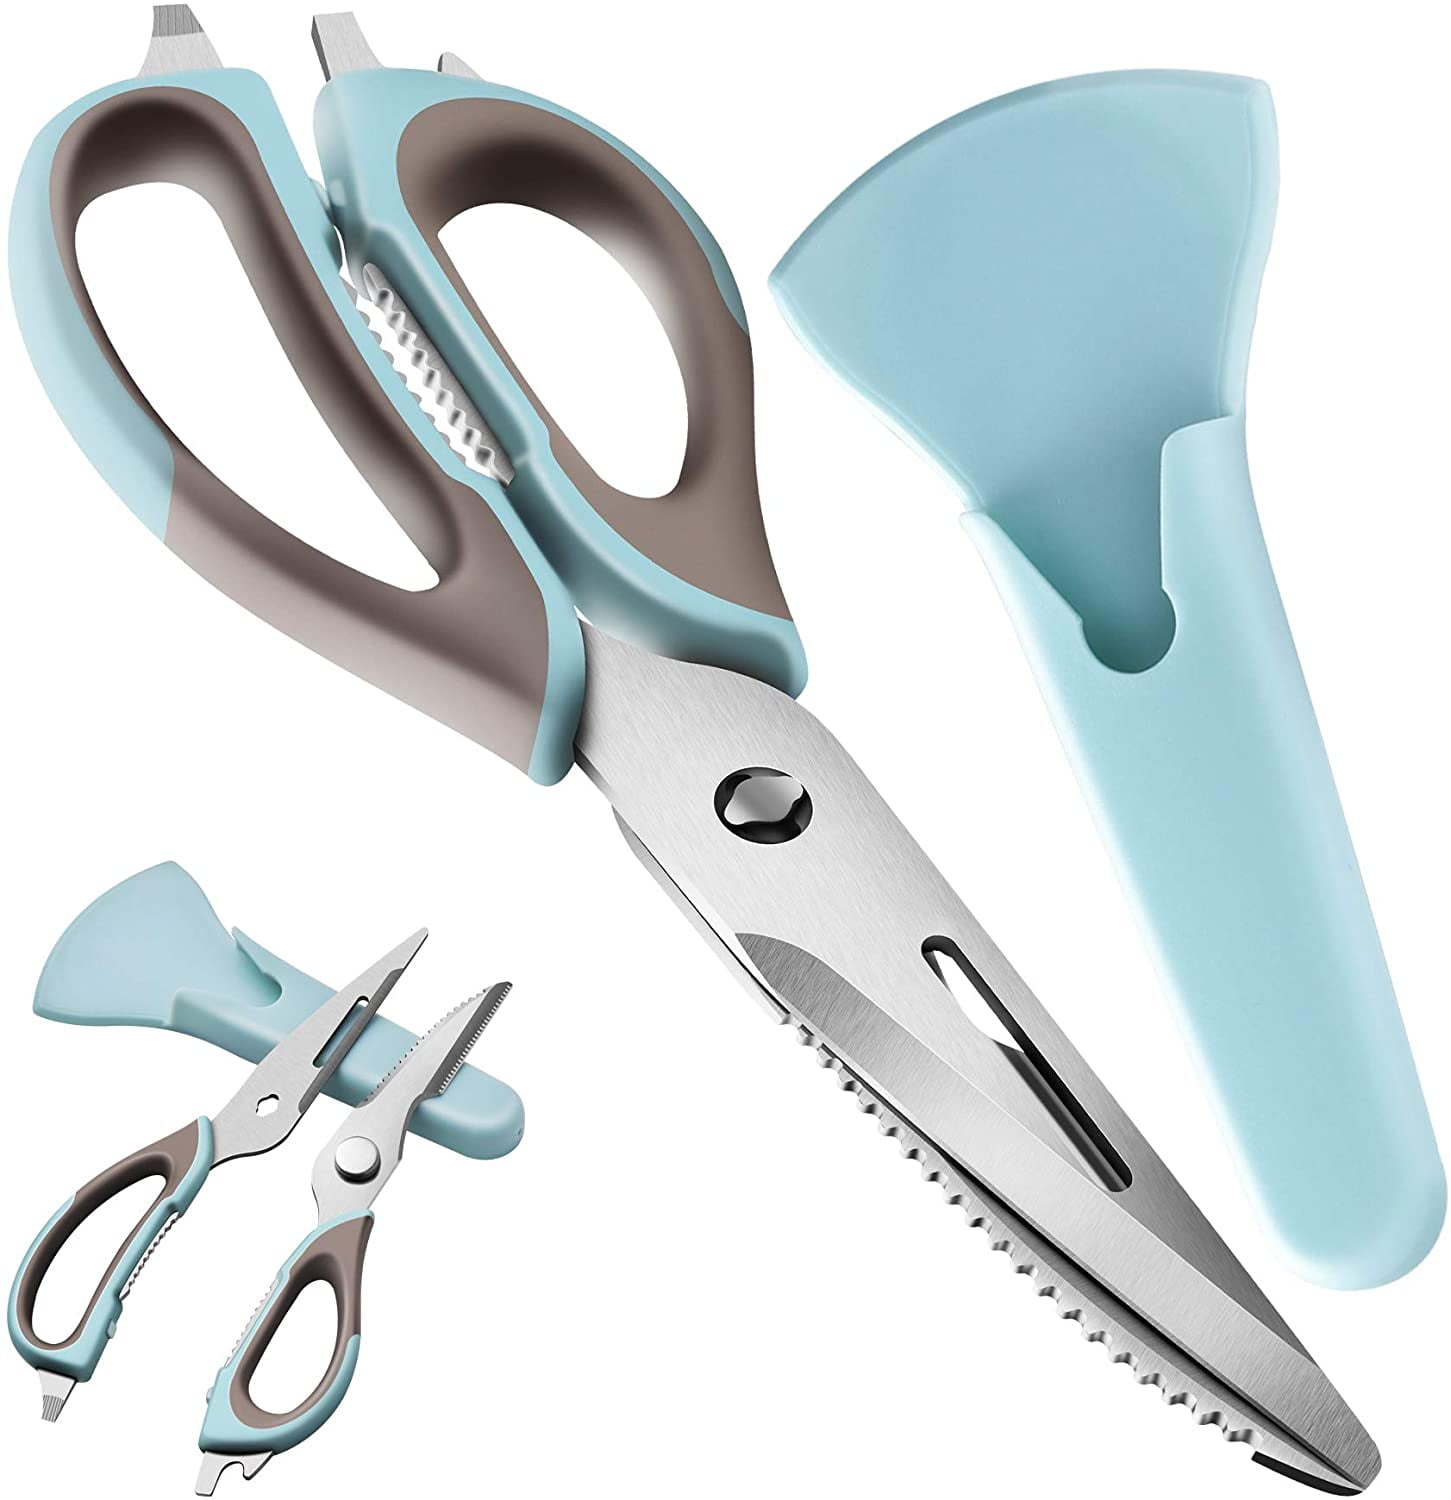 Kitchen Scissors-Heavy Duty Kitchen Shears Stainless Steel,Comes-Apart Detachable Kitchen Shears,with Magnetic Holder,for Chicken,Meat,Food,Vegetables